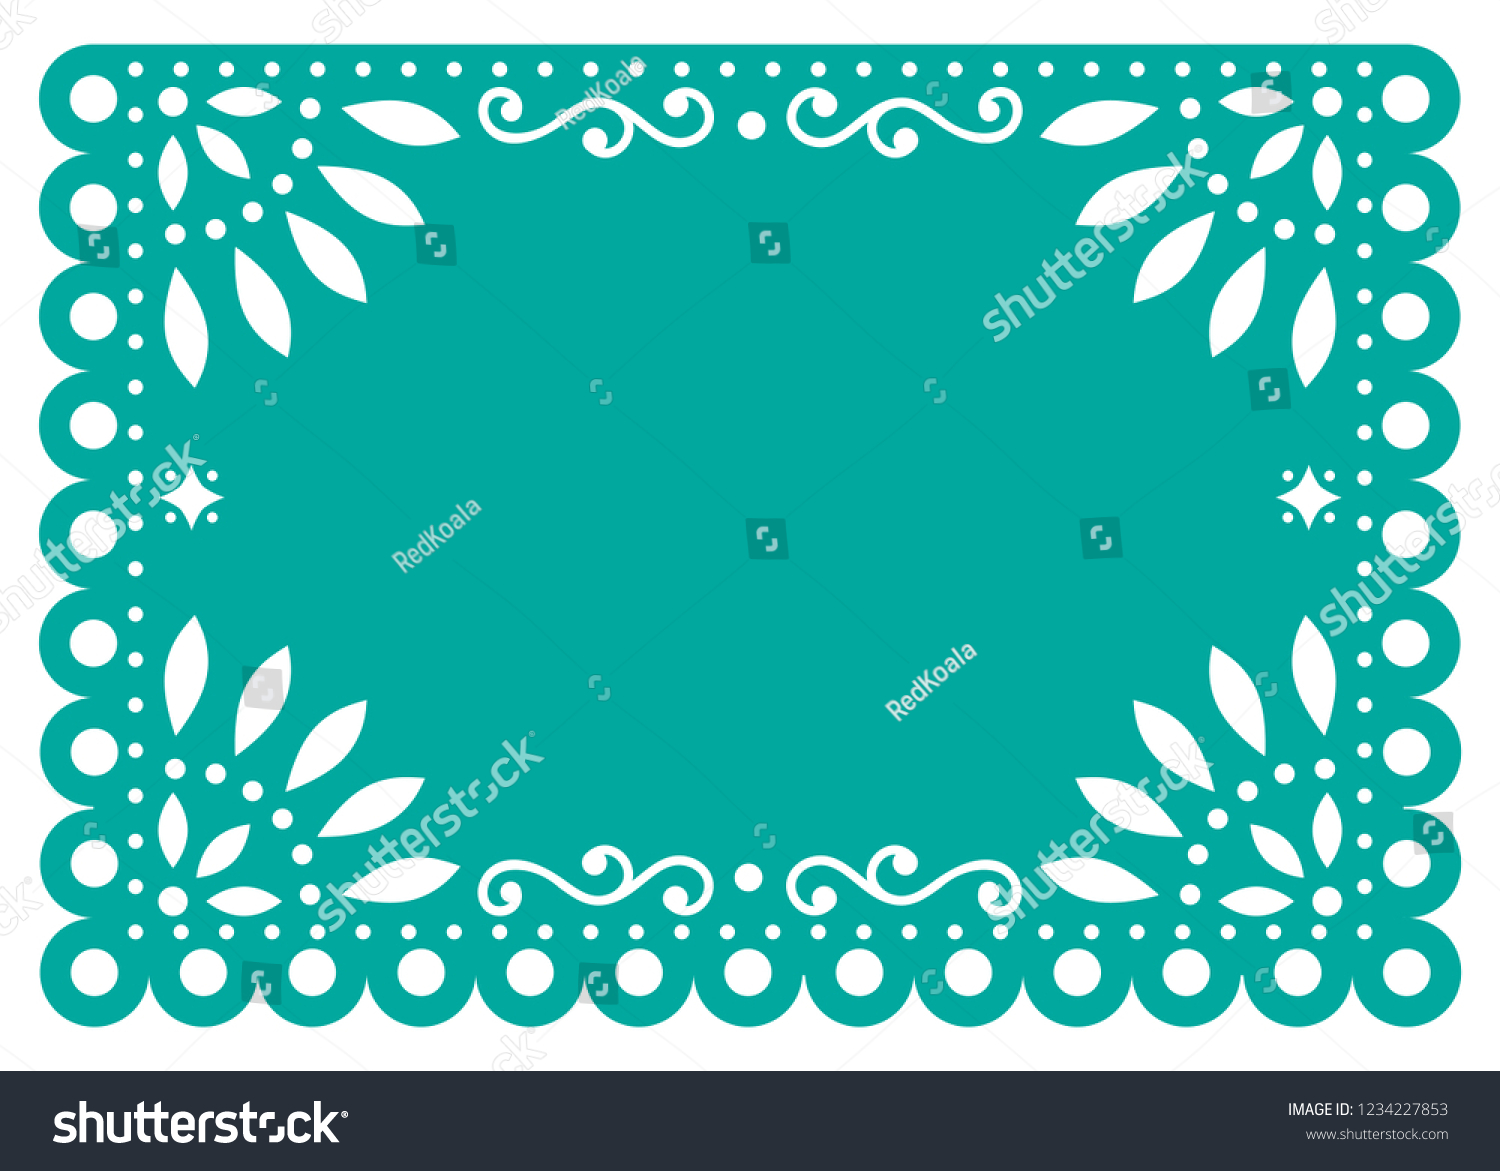 Papel Picado Vector Template Design Turquoise Stock Vector Royalty Free 1234227853 Shutterstock 1968